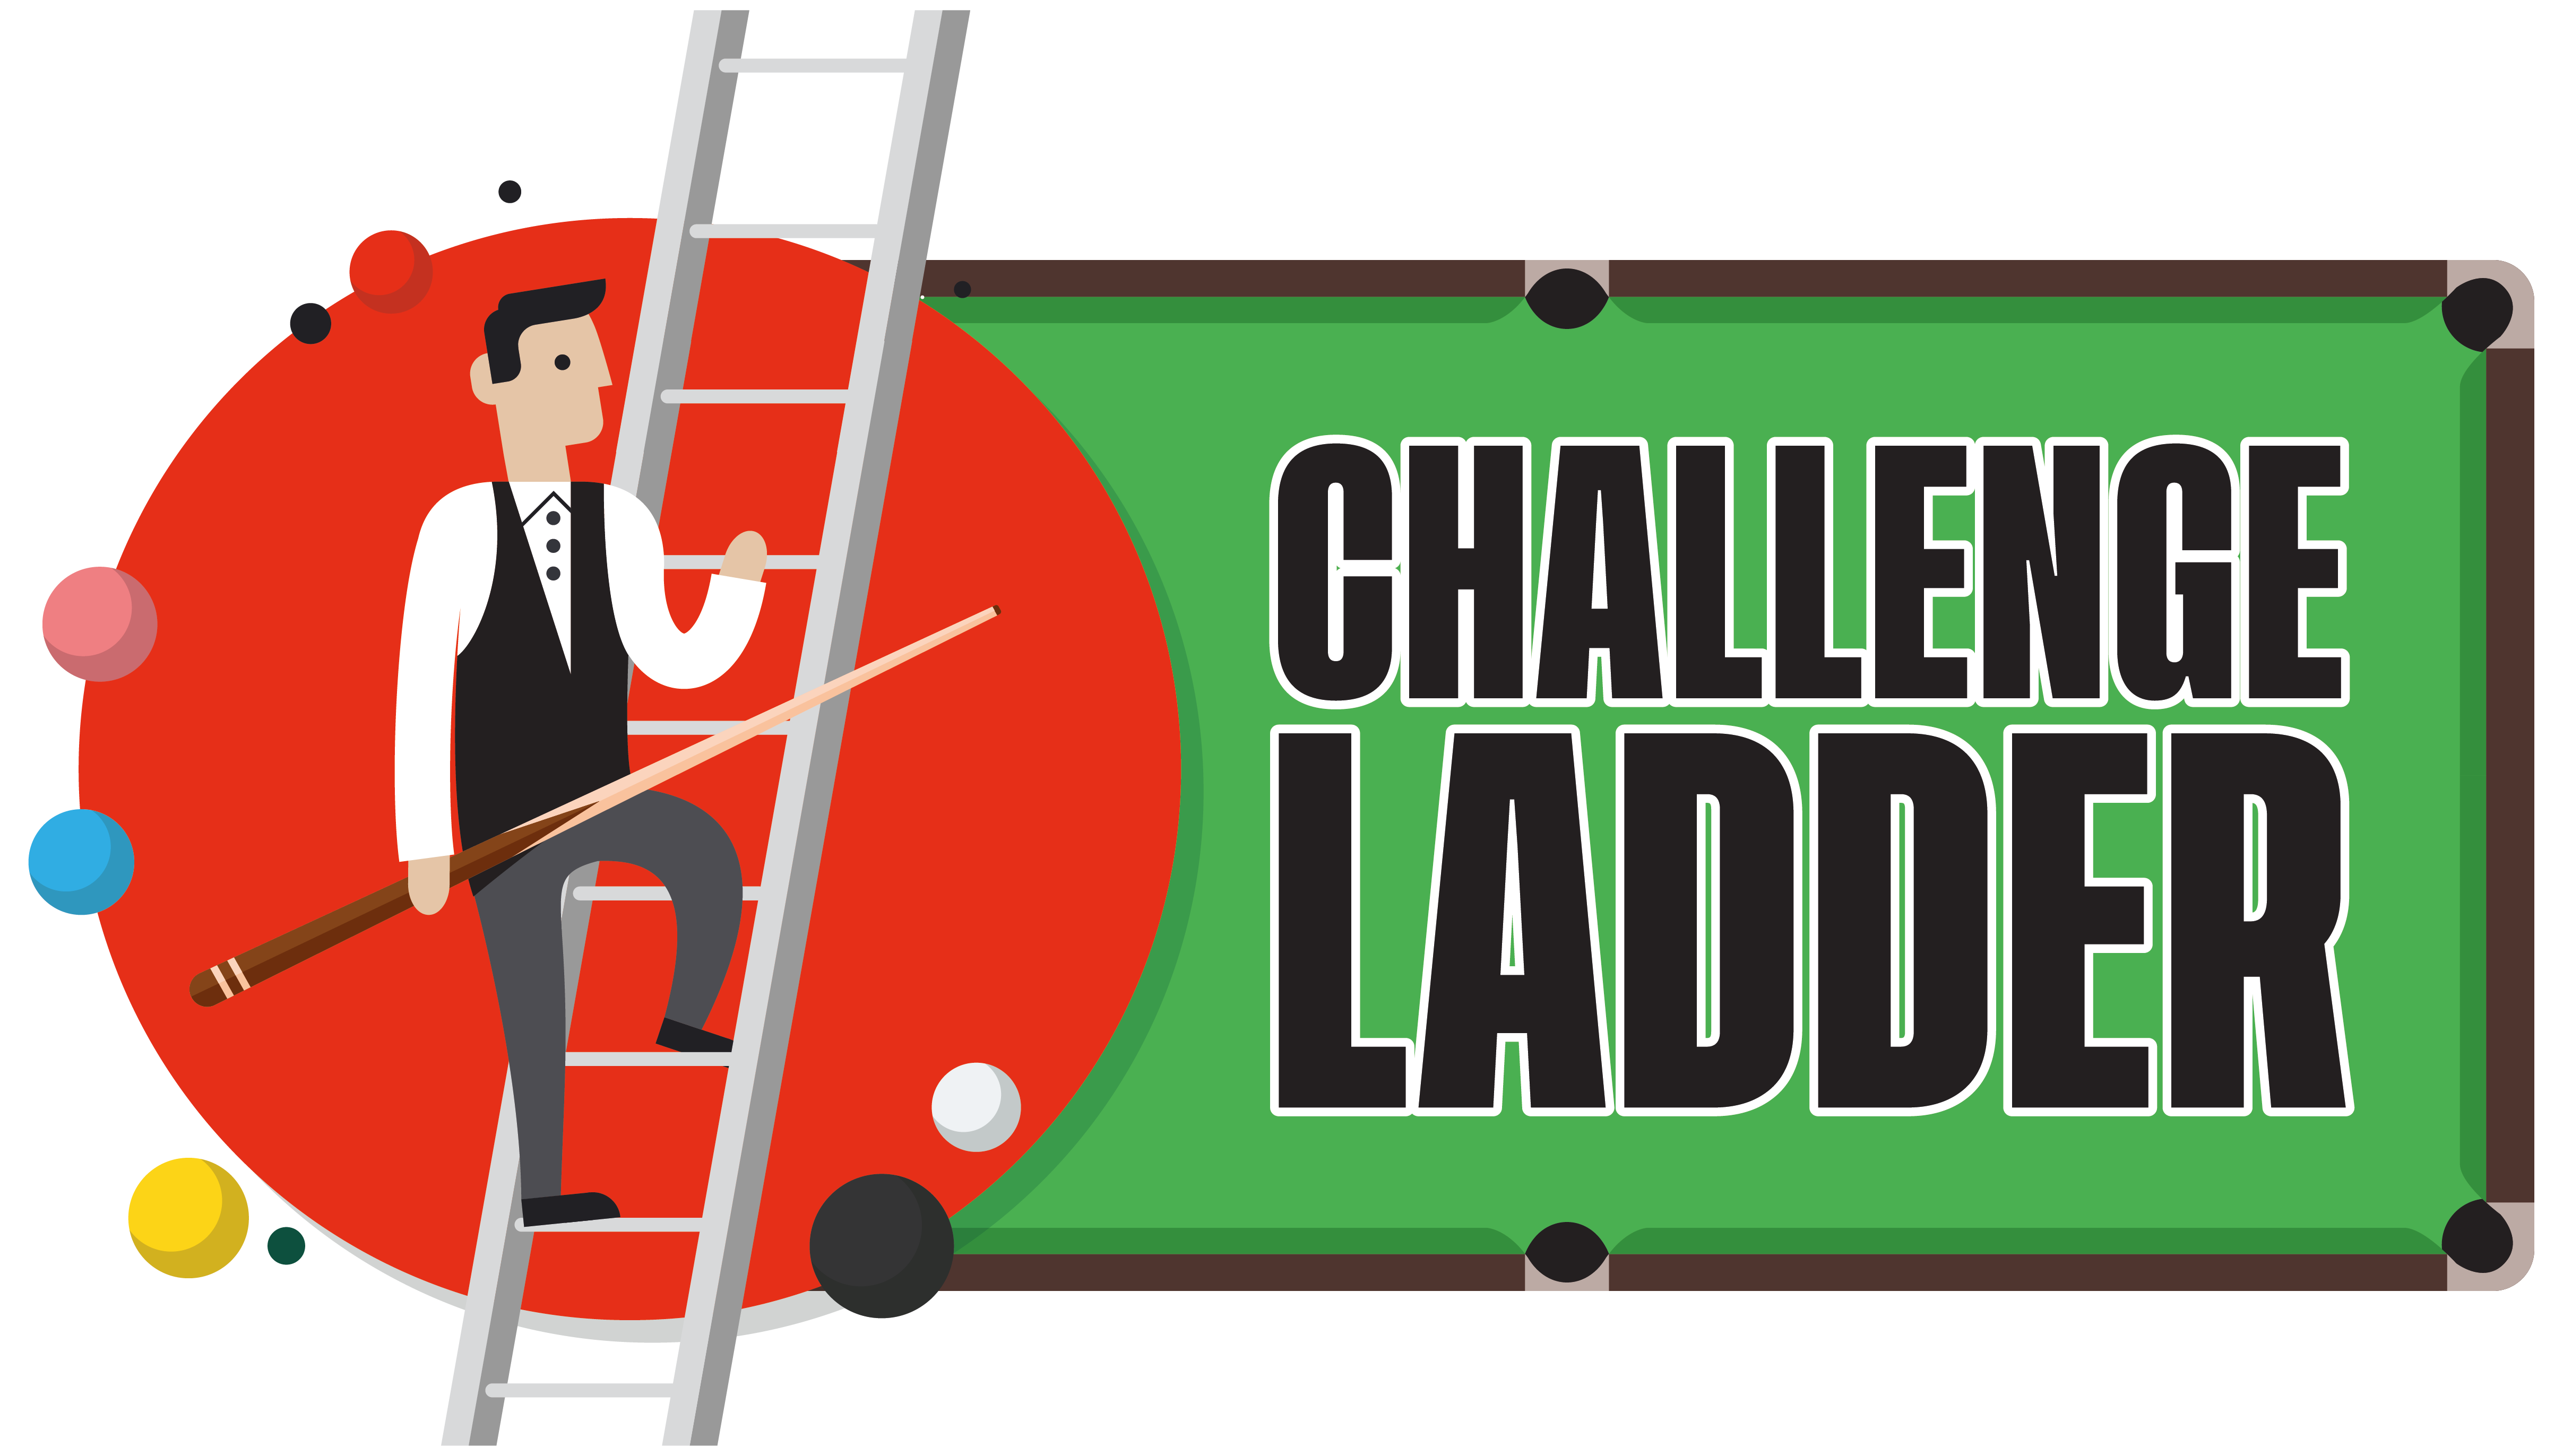 Challenge Ladder season 2022/23 – prize money totalling £1,000 plus 15 trophies to be presented